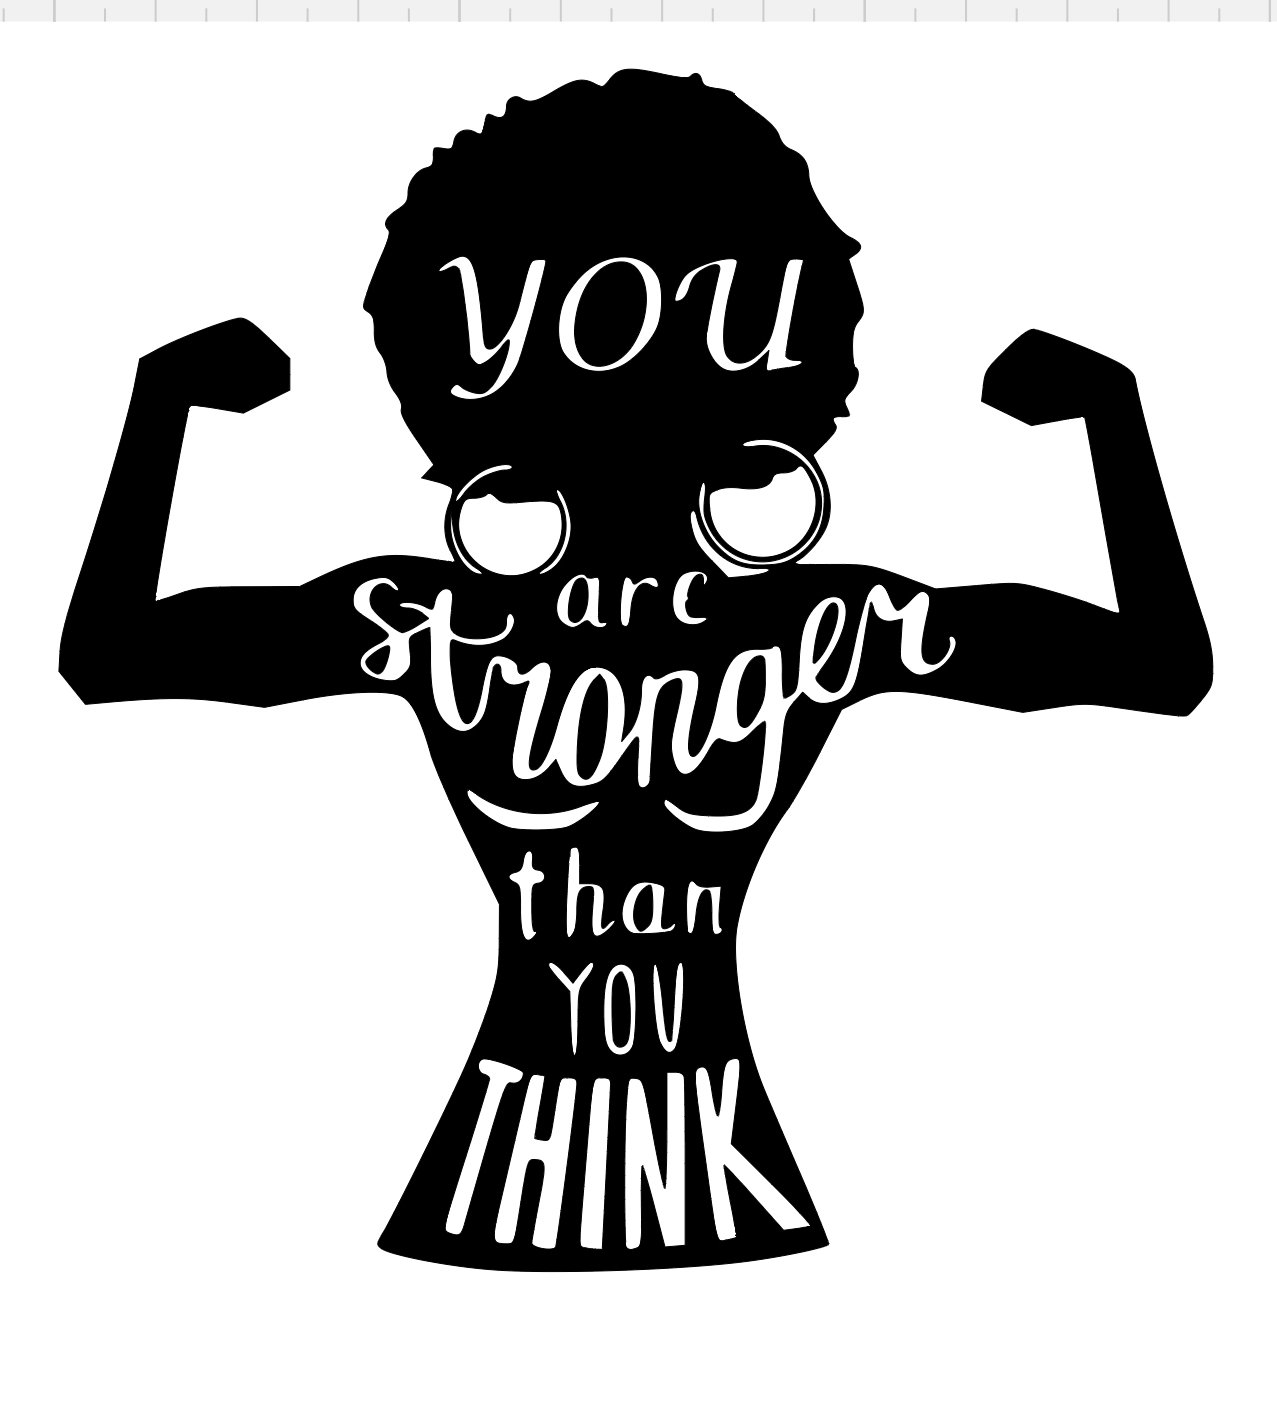 Image of "You are Stronger"